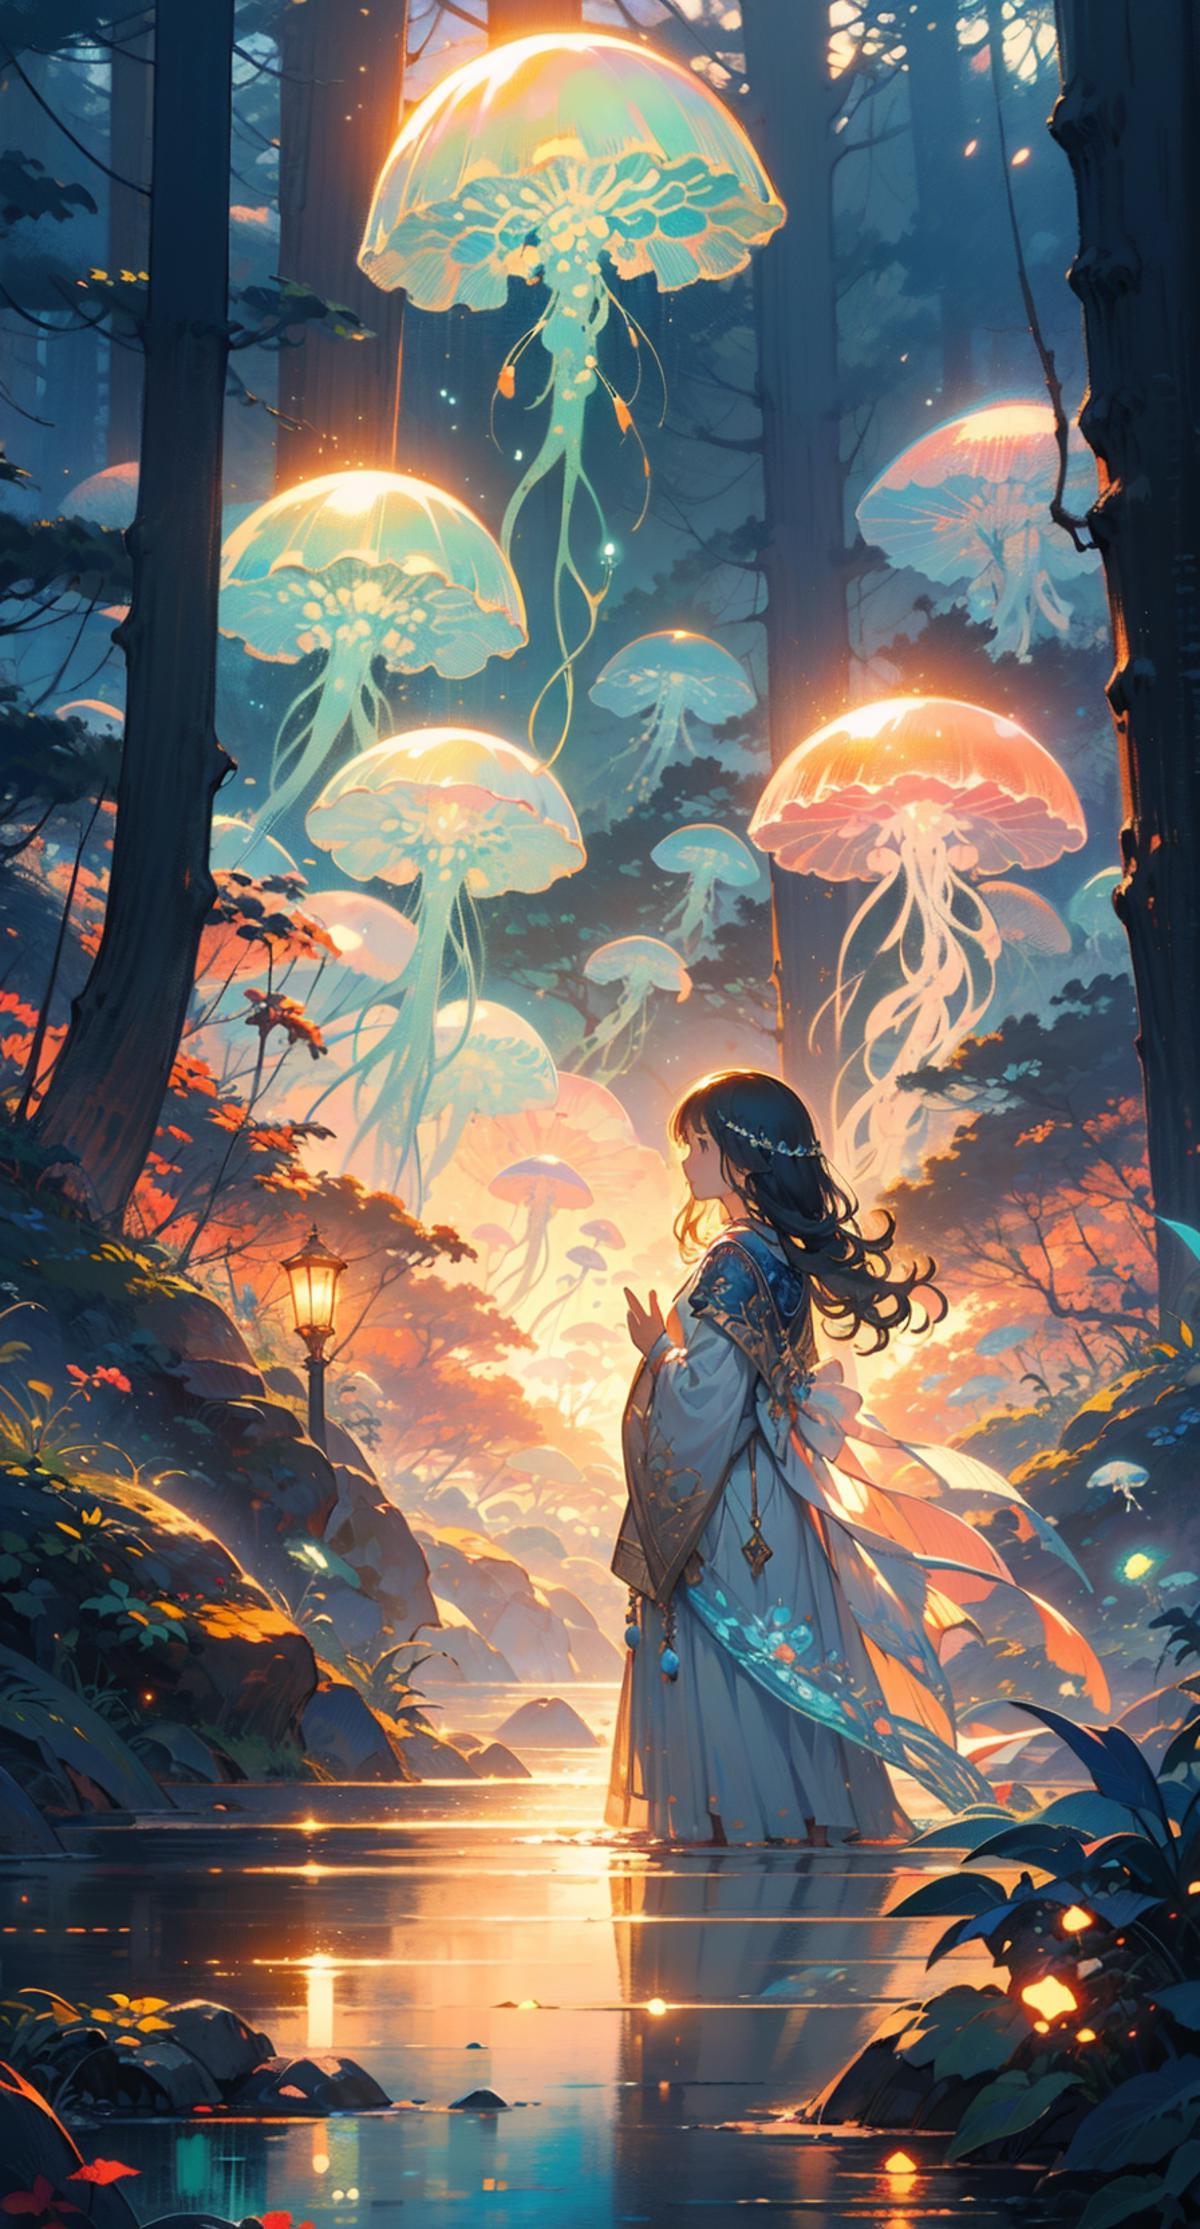 Illustration of a girl in a flowing dress surrounded by a forest of glowing mushrooms and jellyfish.